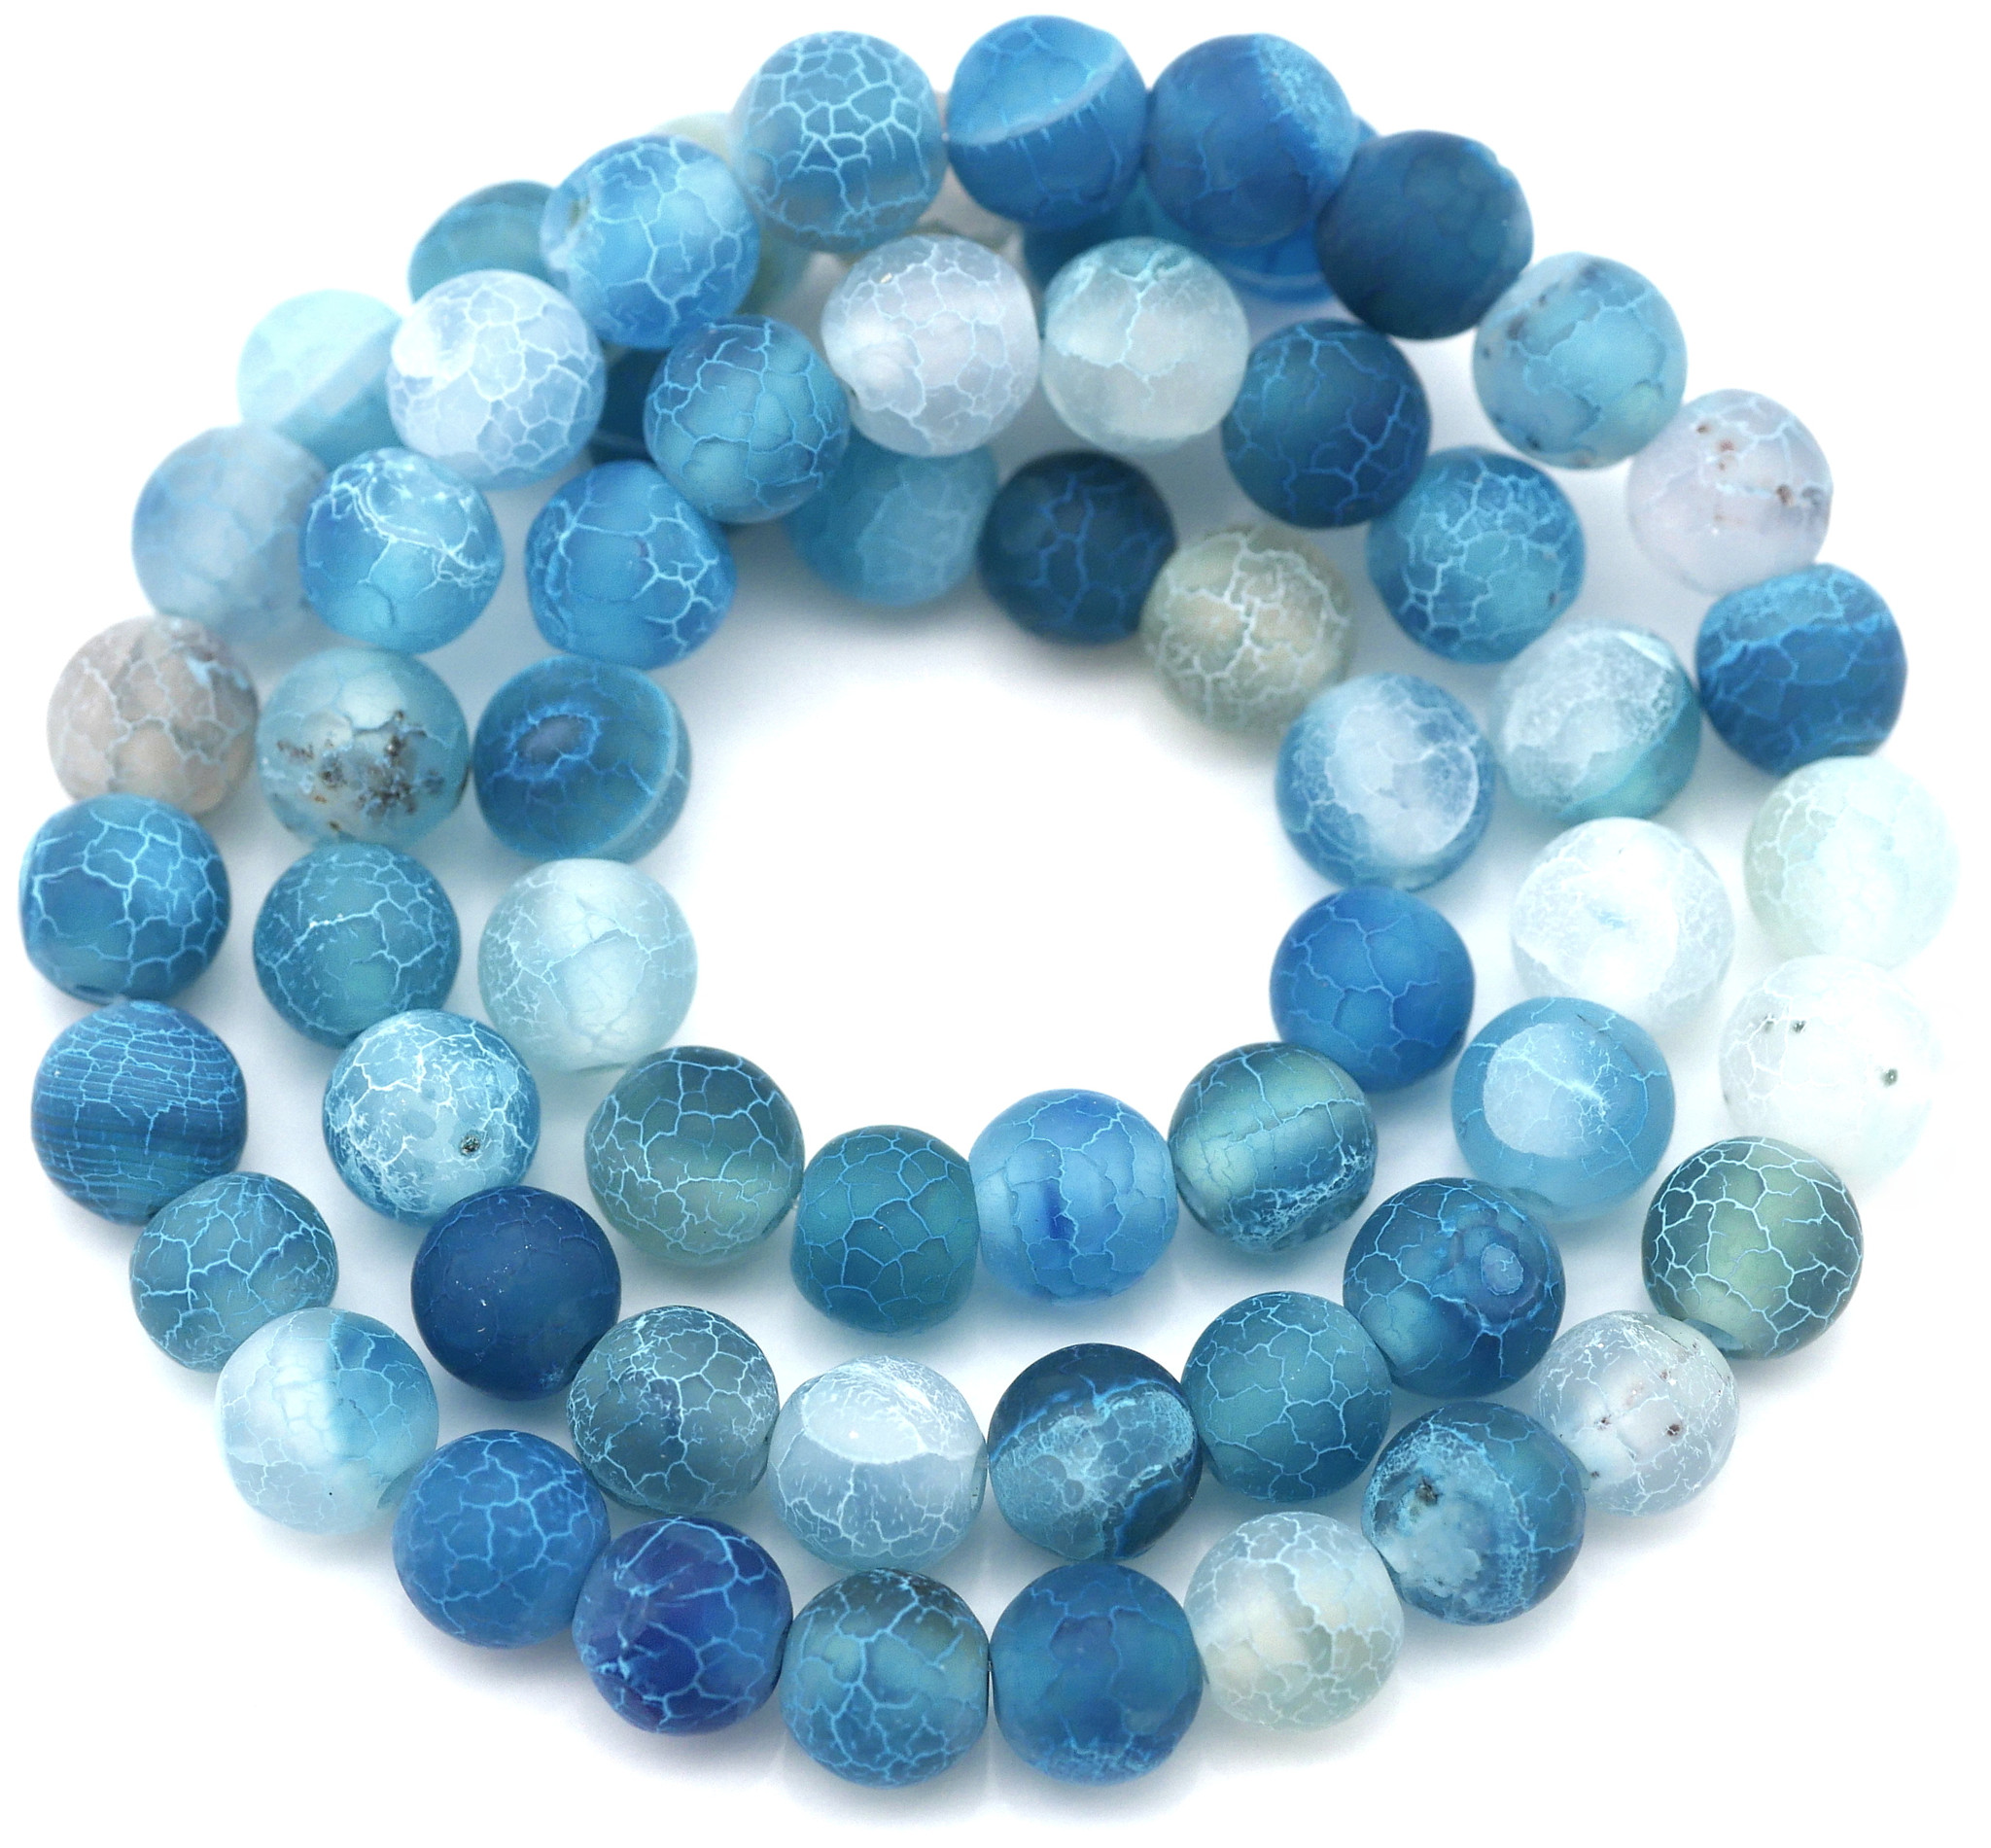 Approx. 13 Strand 6mm Matte Crackle Agate Beads (Dyed/Heated), Frosty Cyan